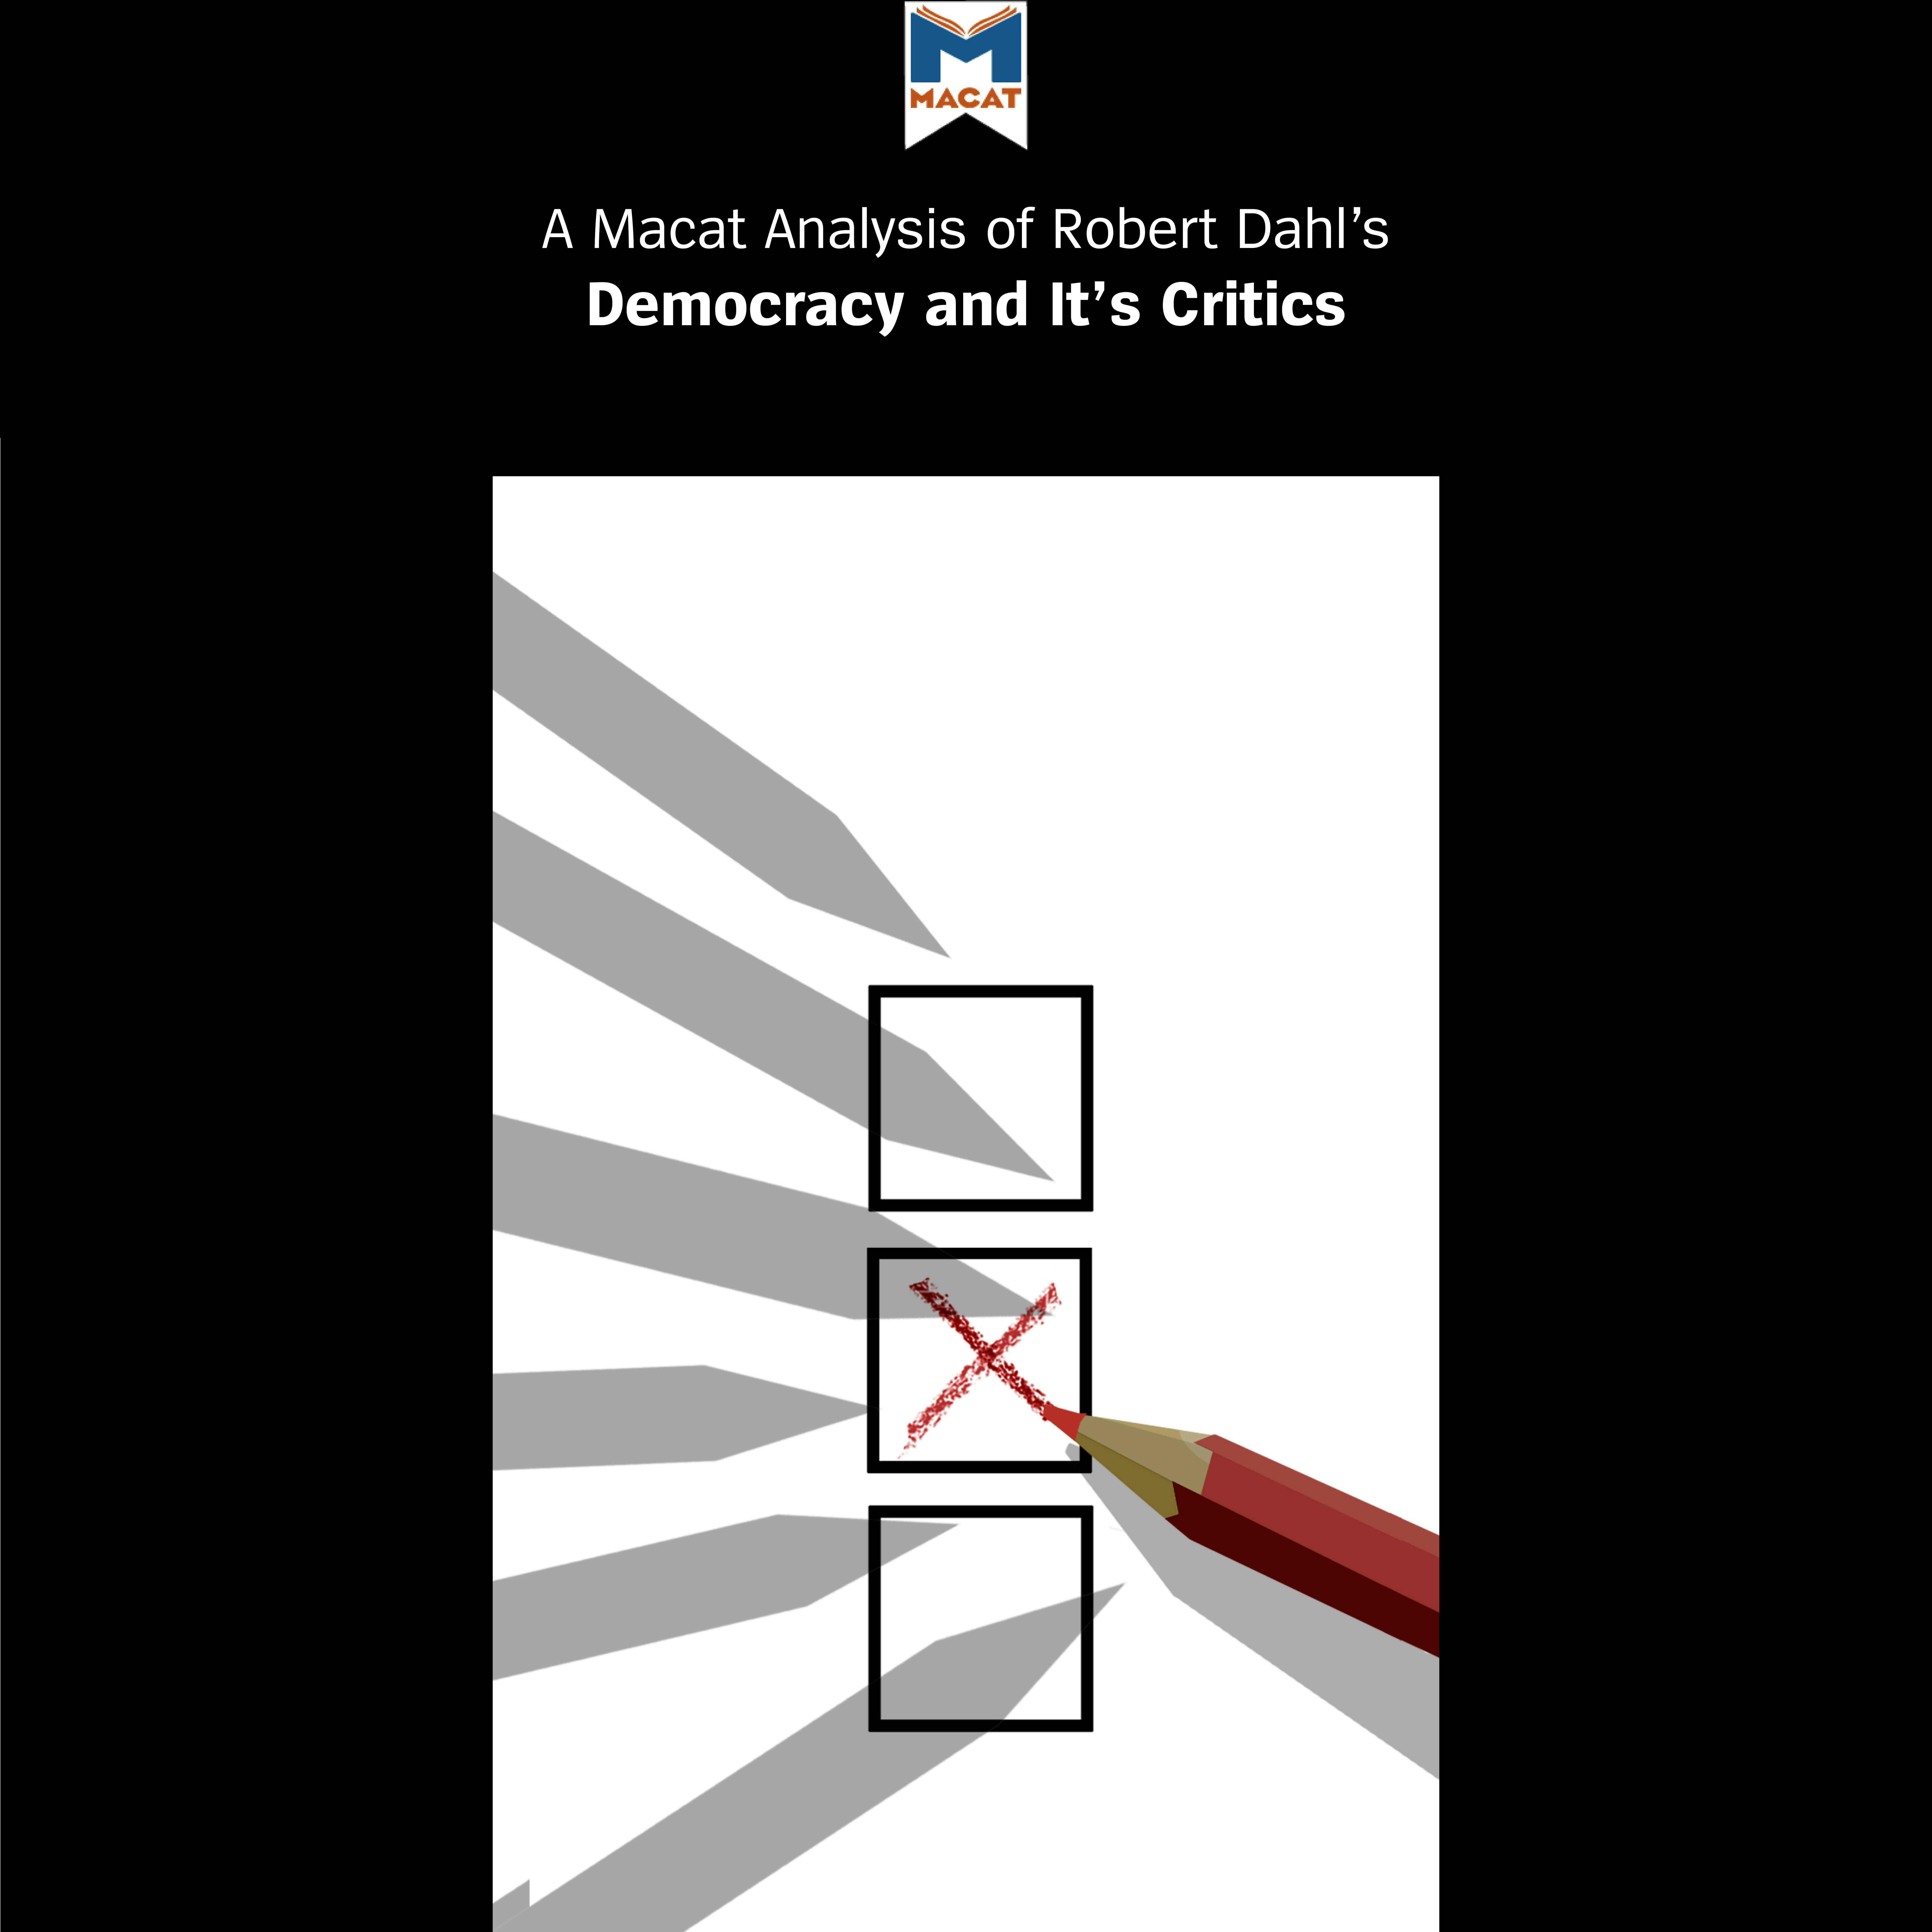 A Macat Analysis of Robert Dahl's Democracy and Its Critics - undefined